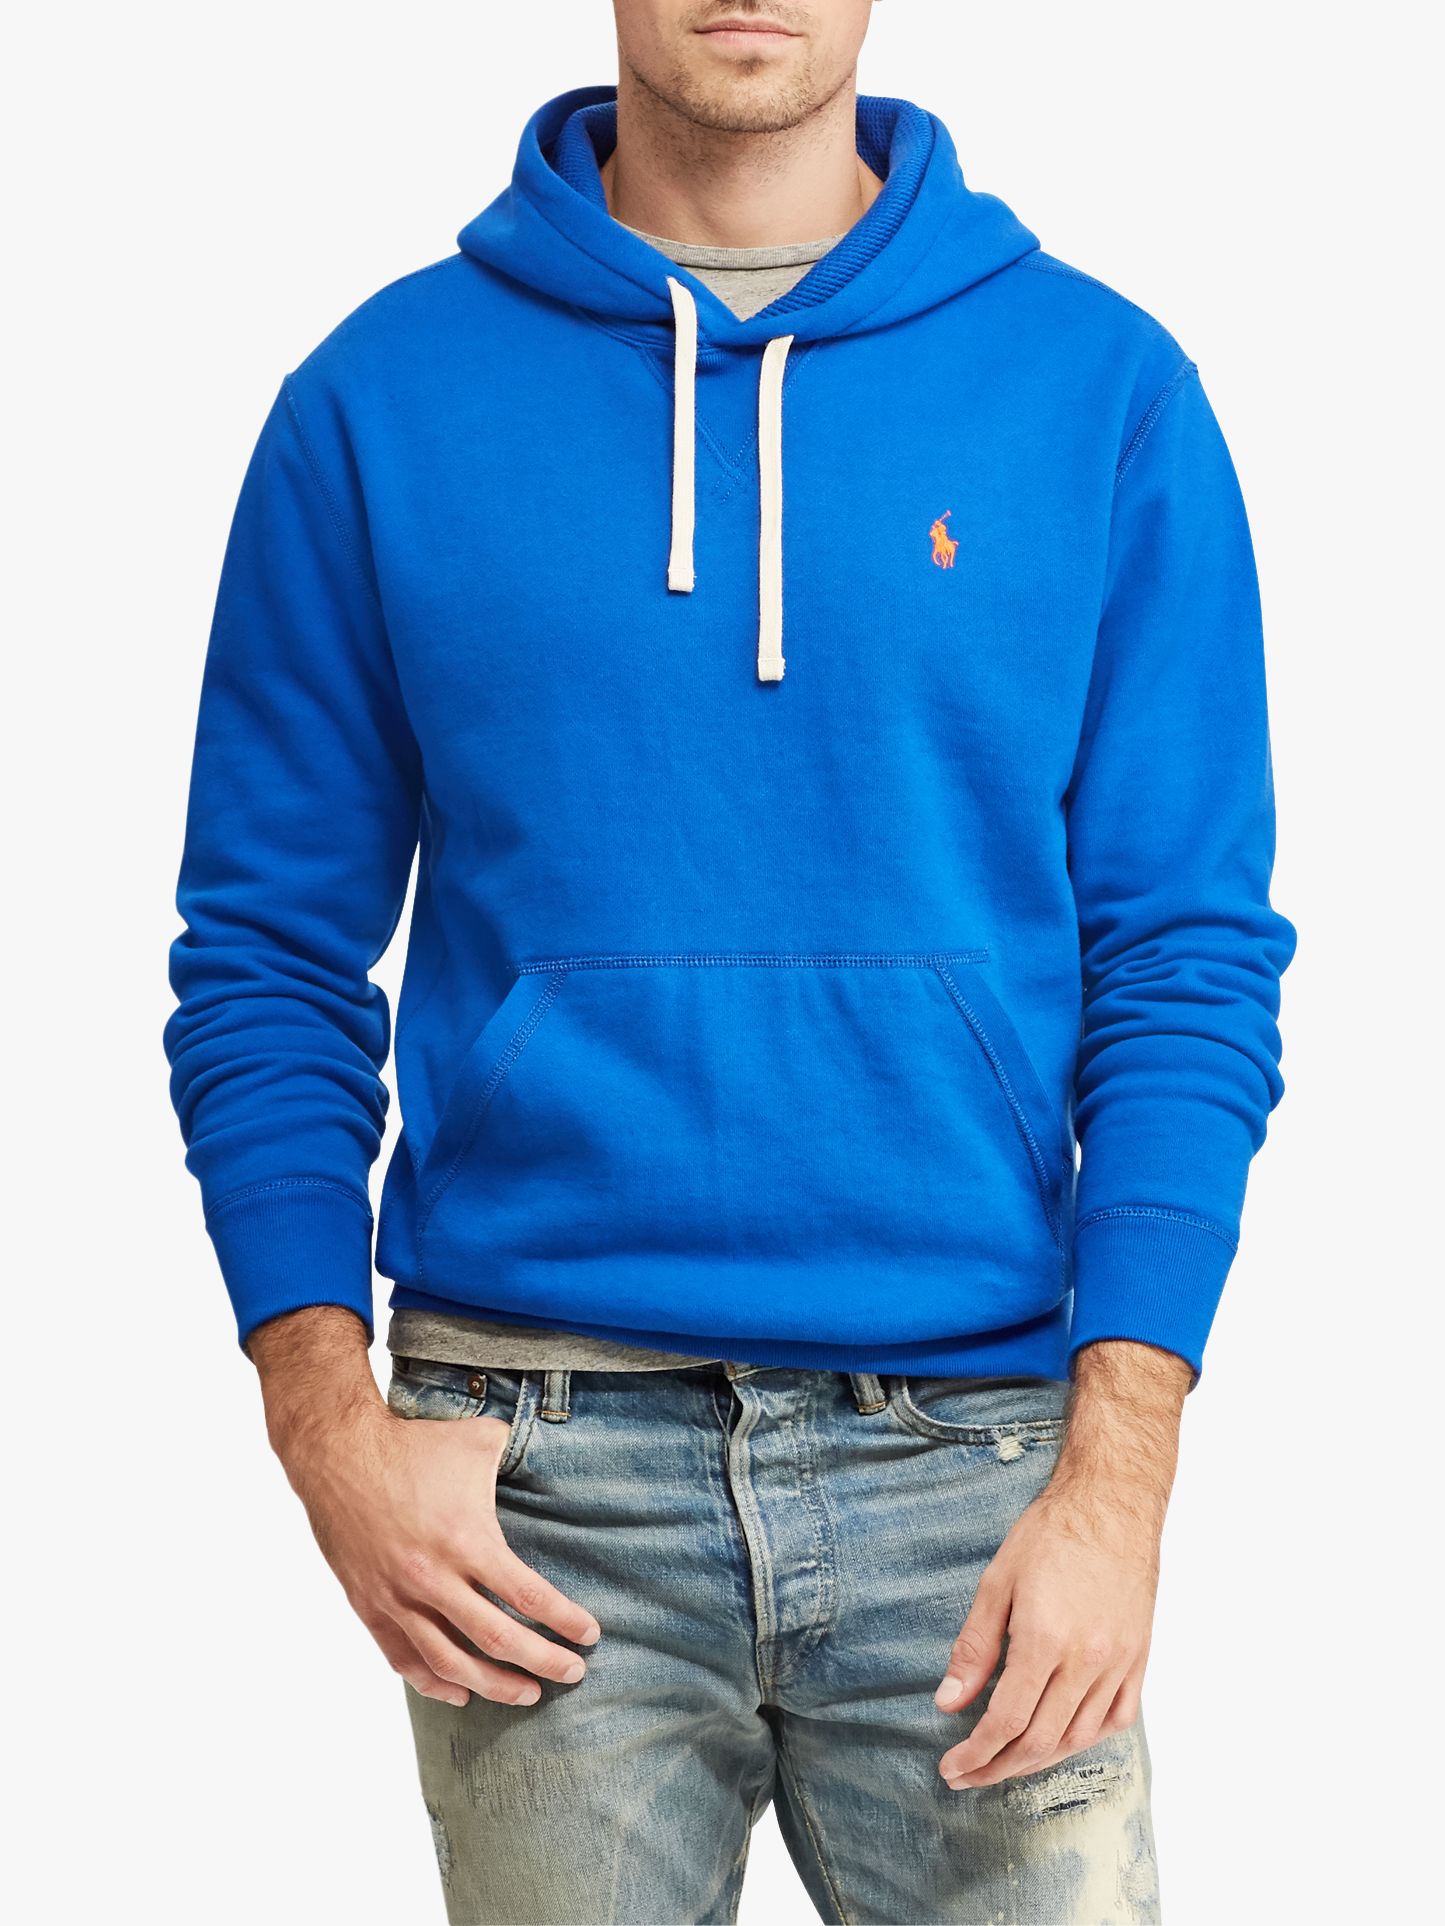 Polo Ralph Lauren Pullover Hoodie at 